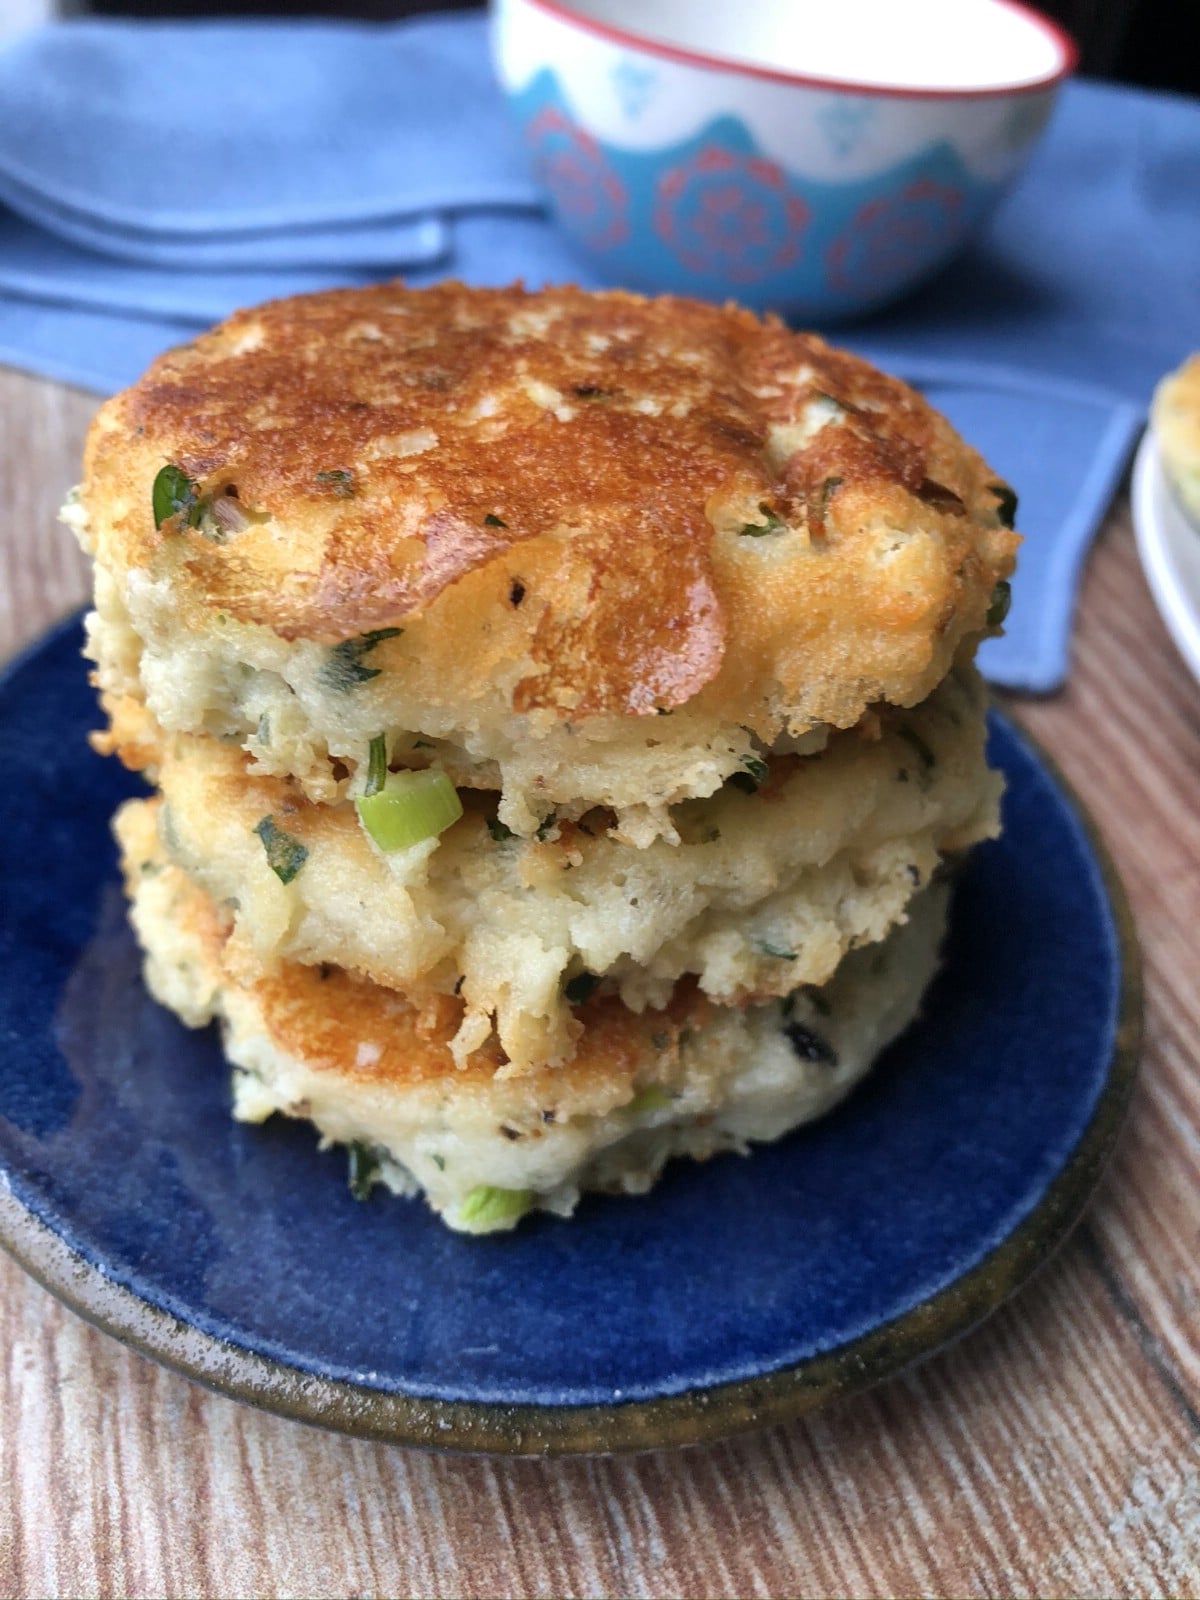 Stack of potato cakes on blue plate